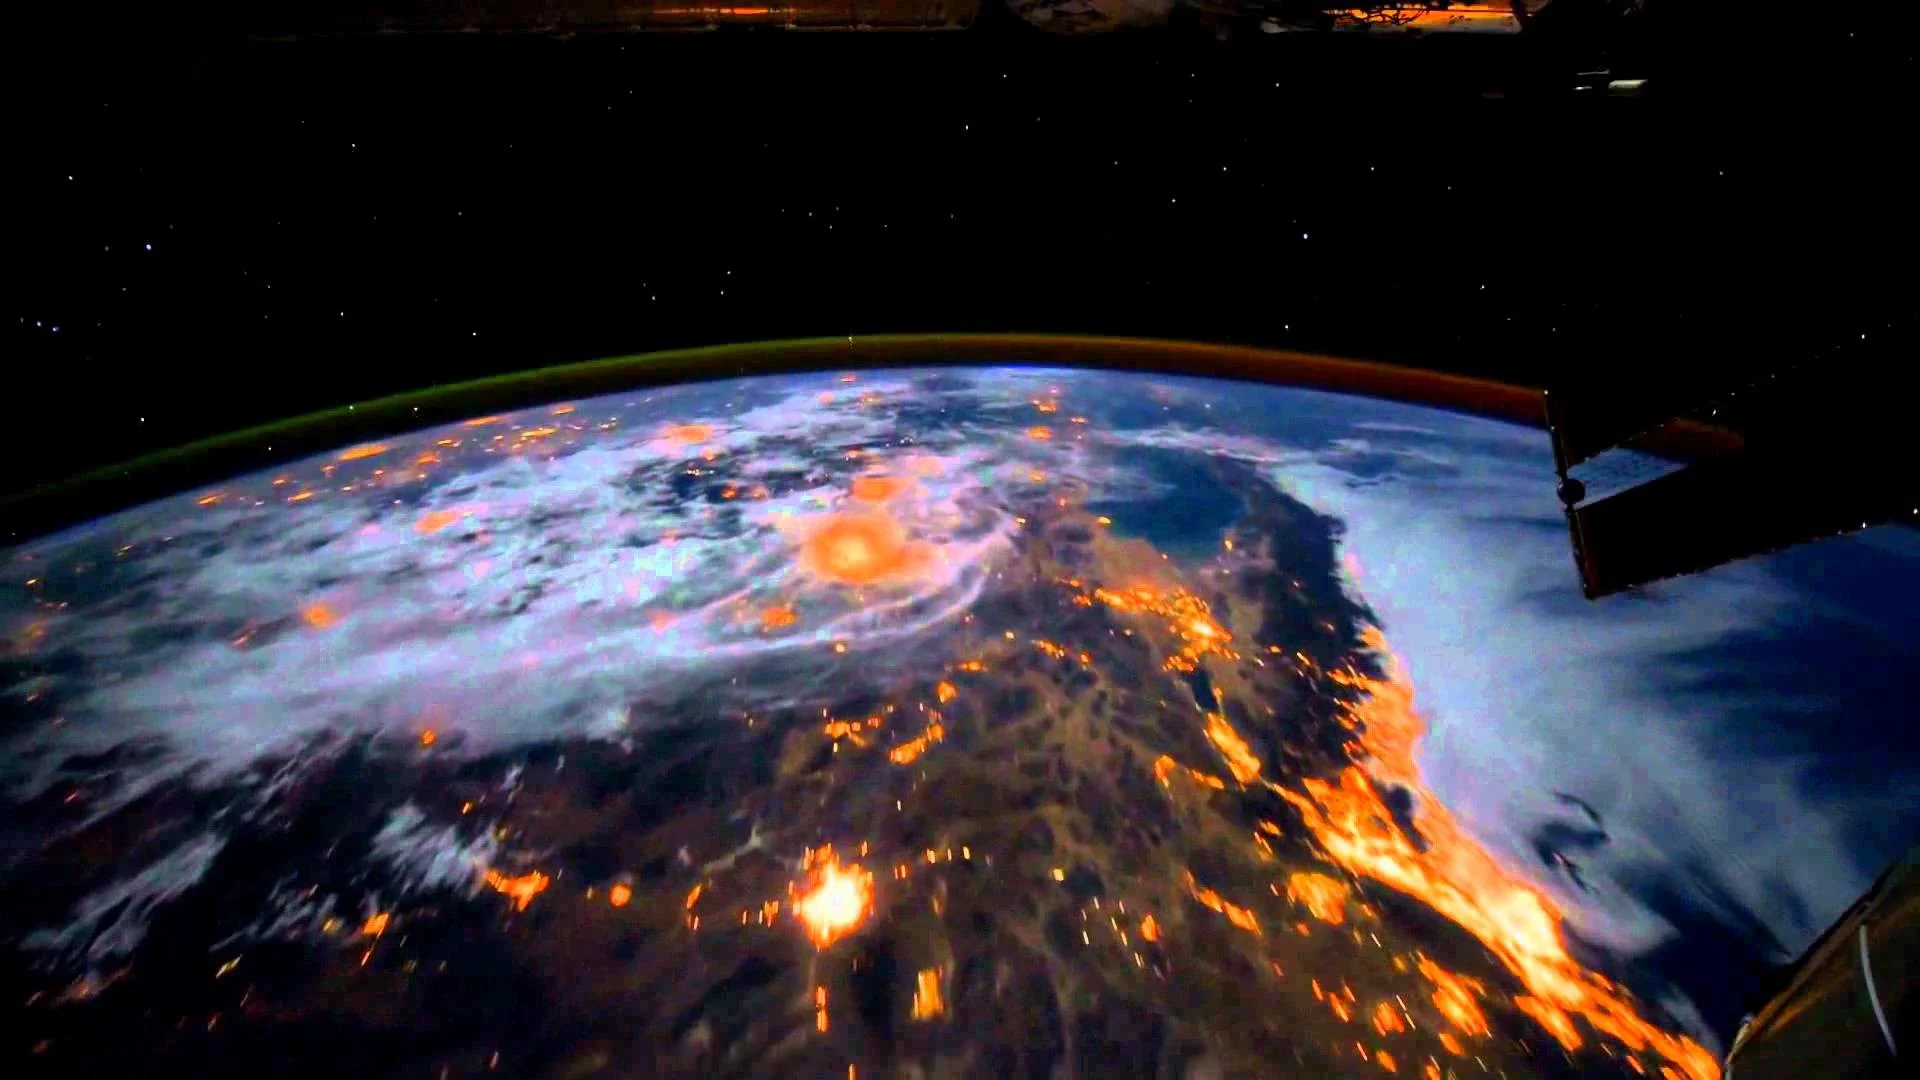 Dreamscene] Animated Wallpaper – Earth View from the ISS – YouTube